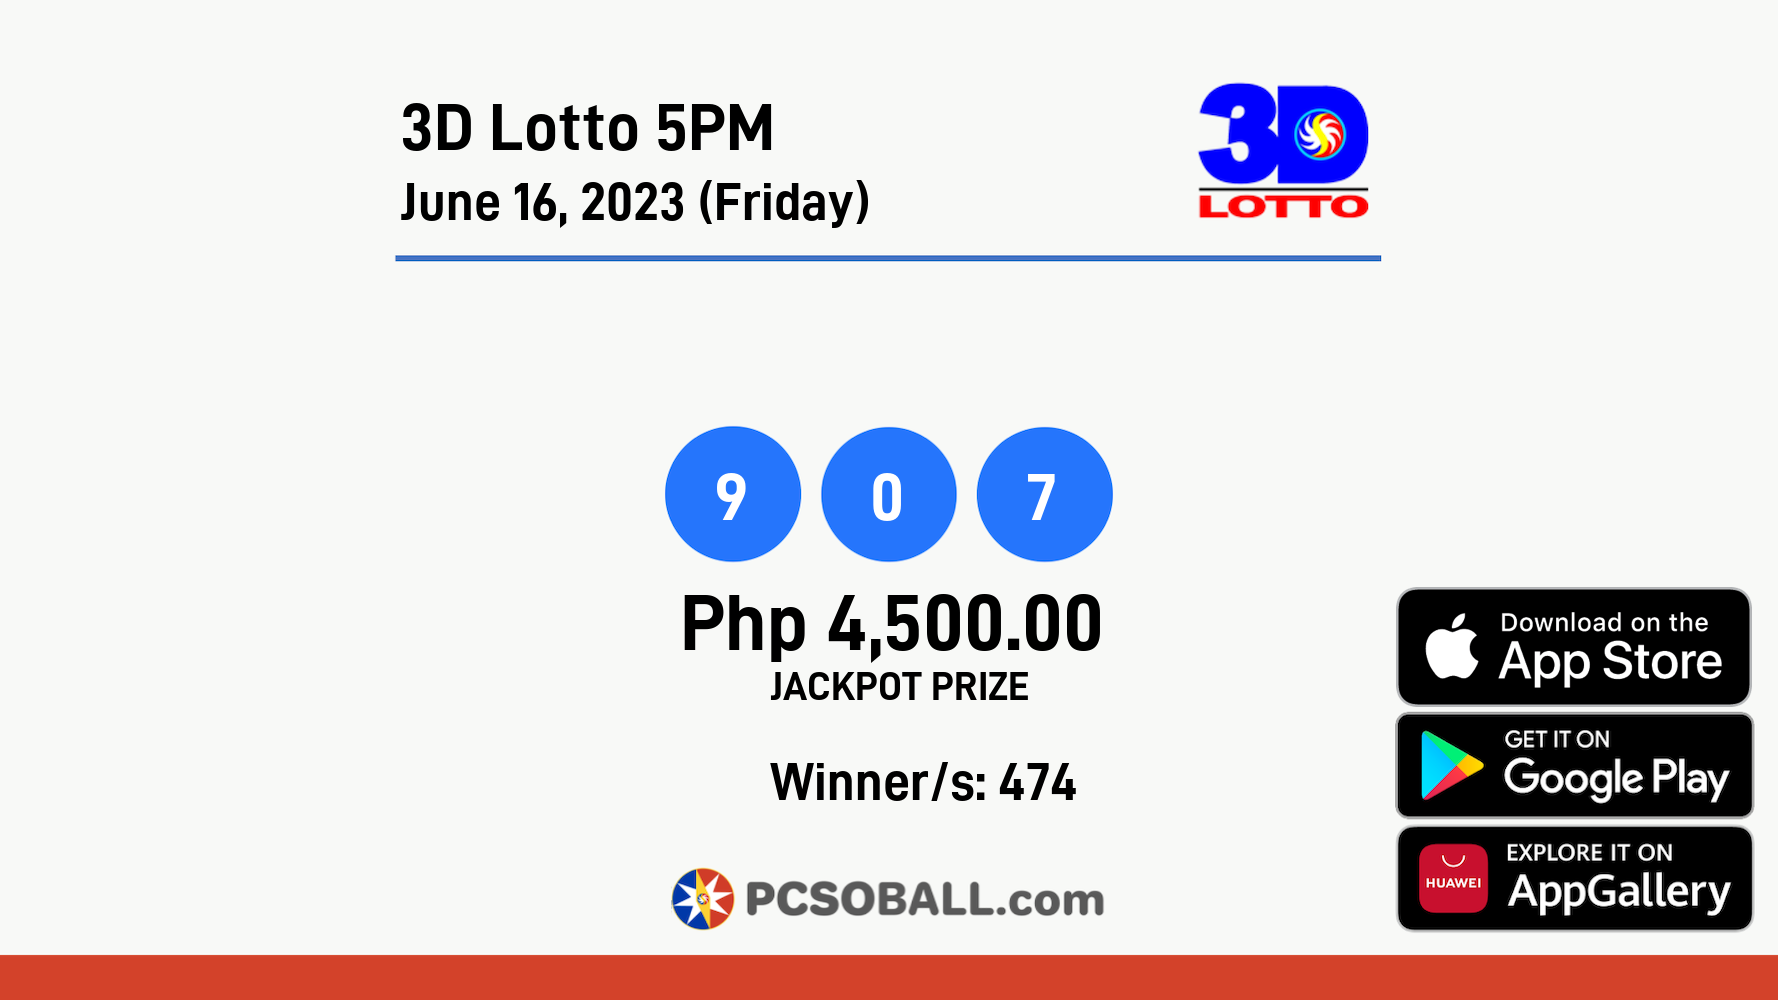 3D Lotto 5PM June 16, 2023 (Friday) Result